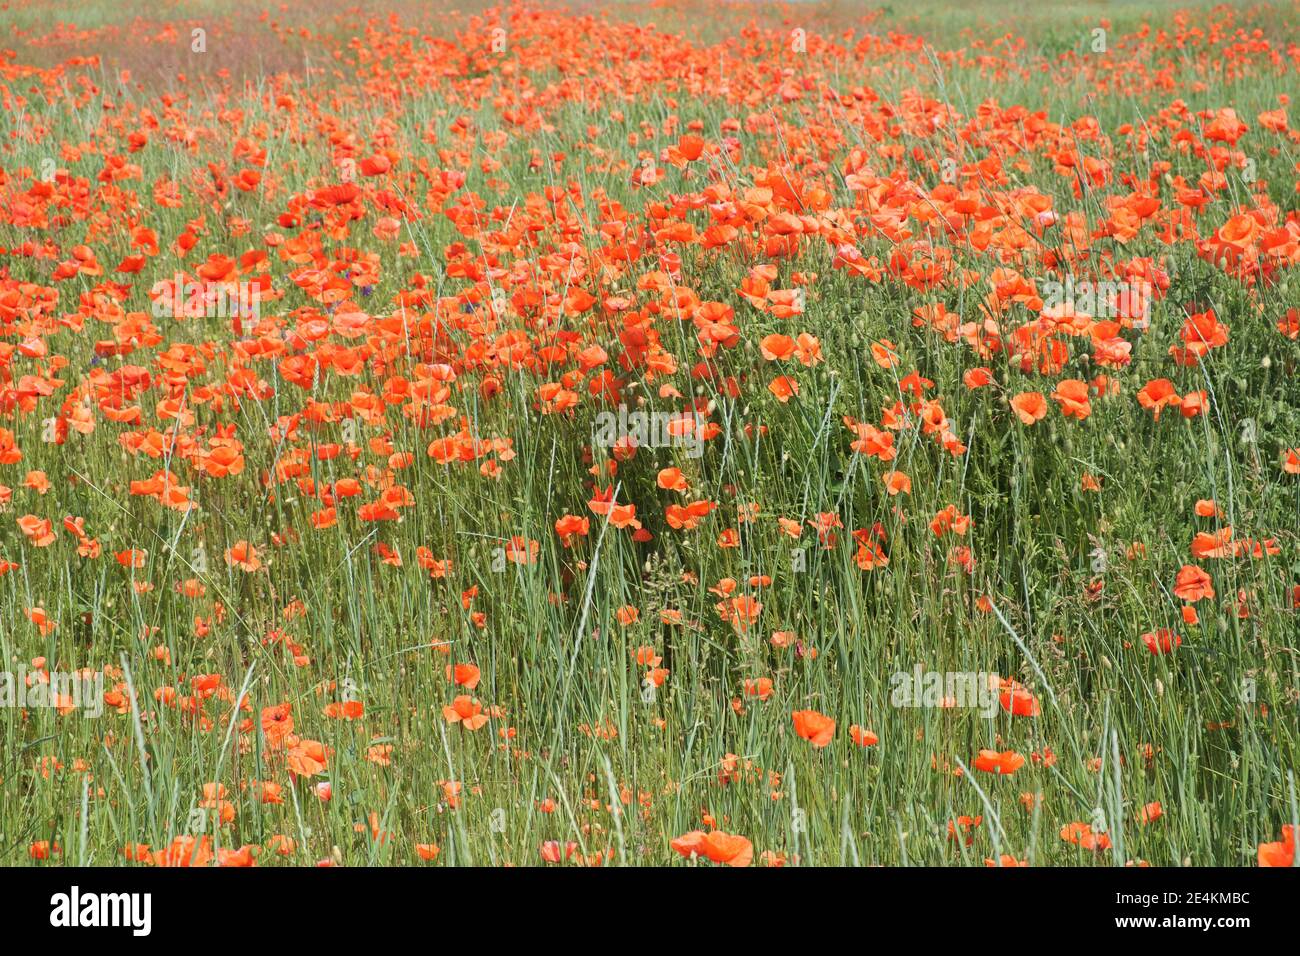 Poppy flowers field. Rural landscape with red wildflowers. Many red poppies in the field. Red wildflowers. Stock Photo